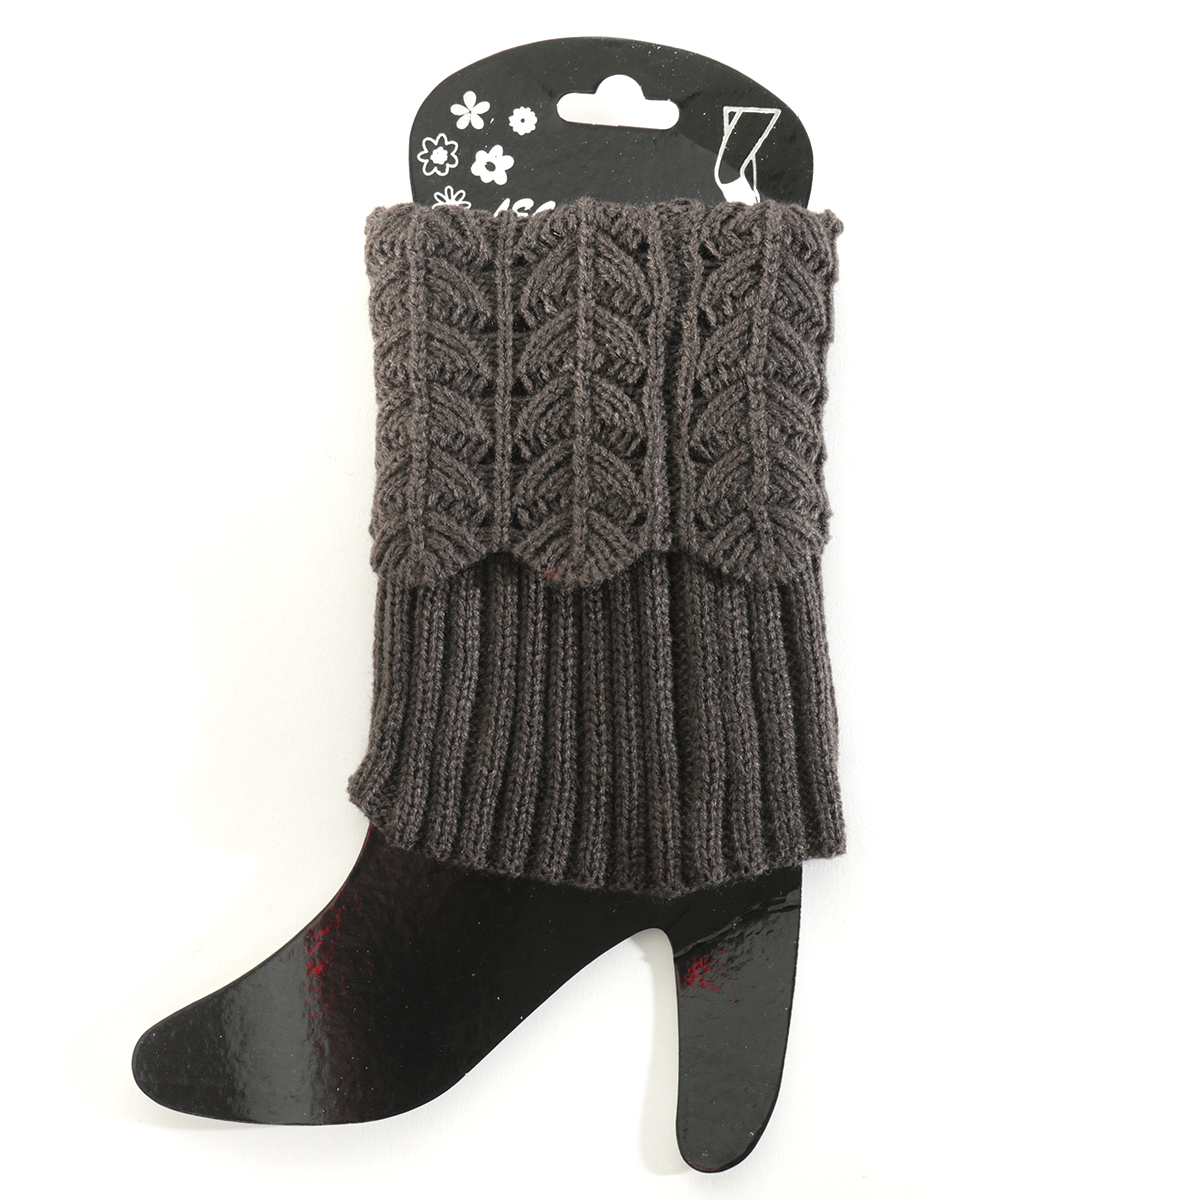 b70 BOOT CUFF CROCHET DK GREY SHORT 4.5IN X 6.25IN - Click Image to Close